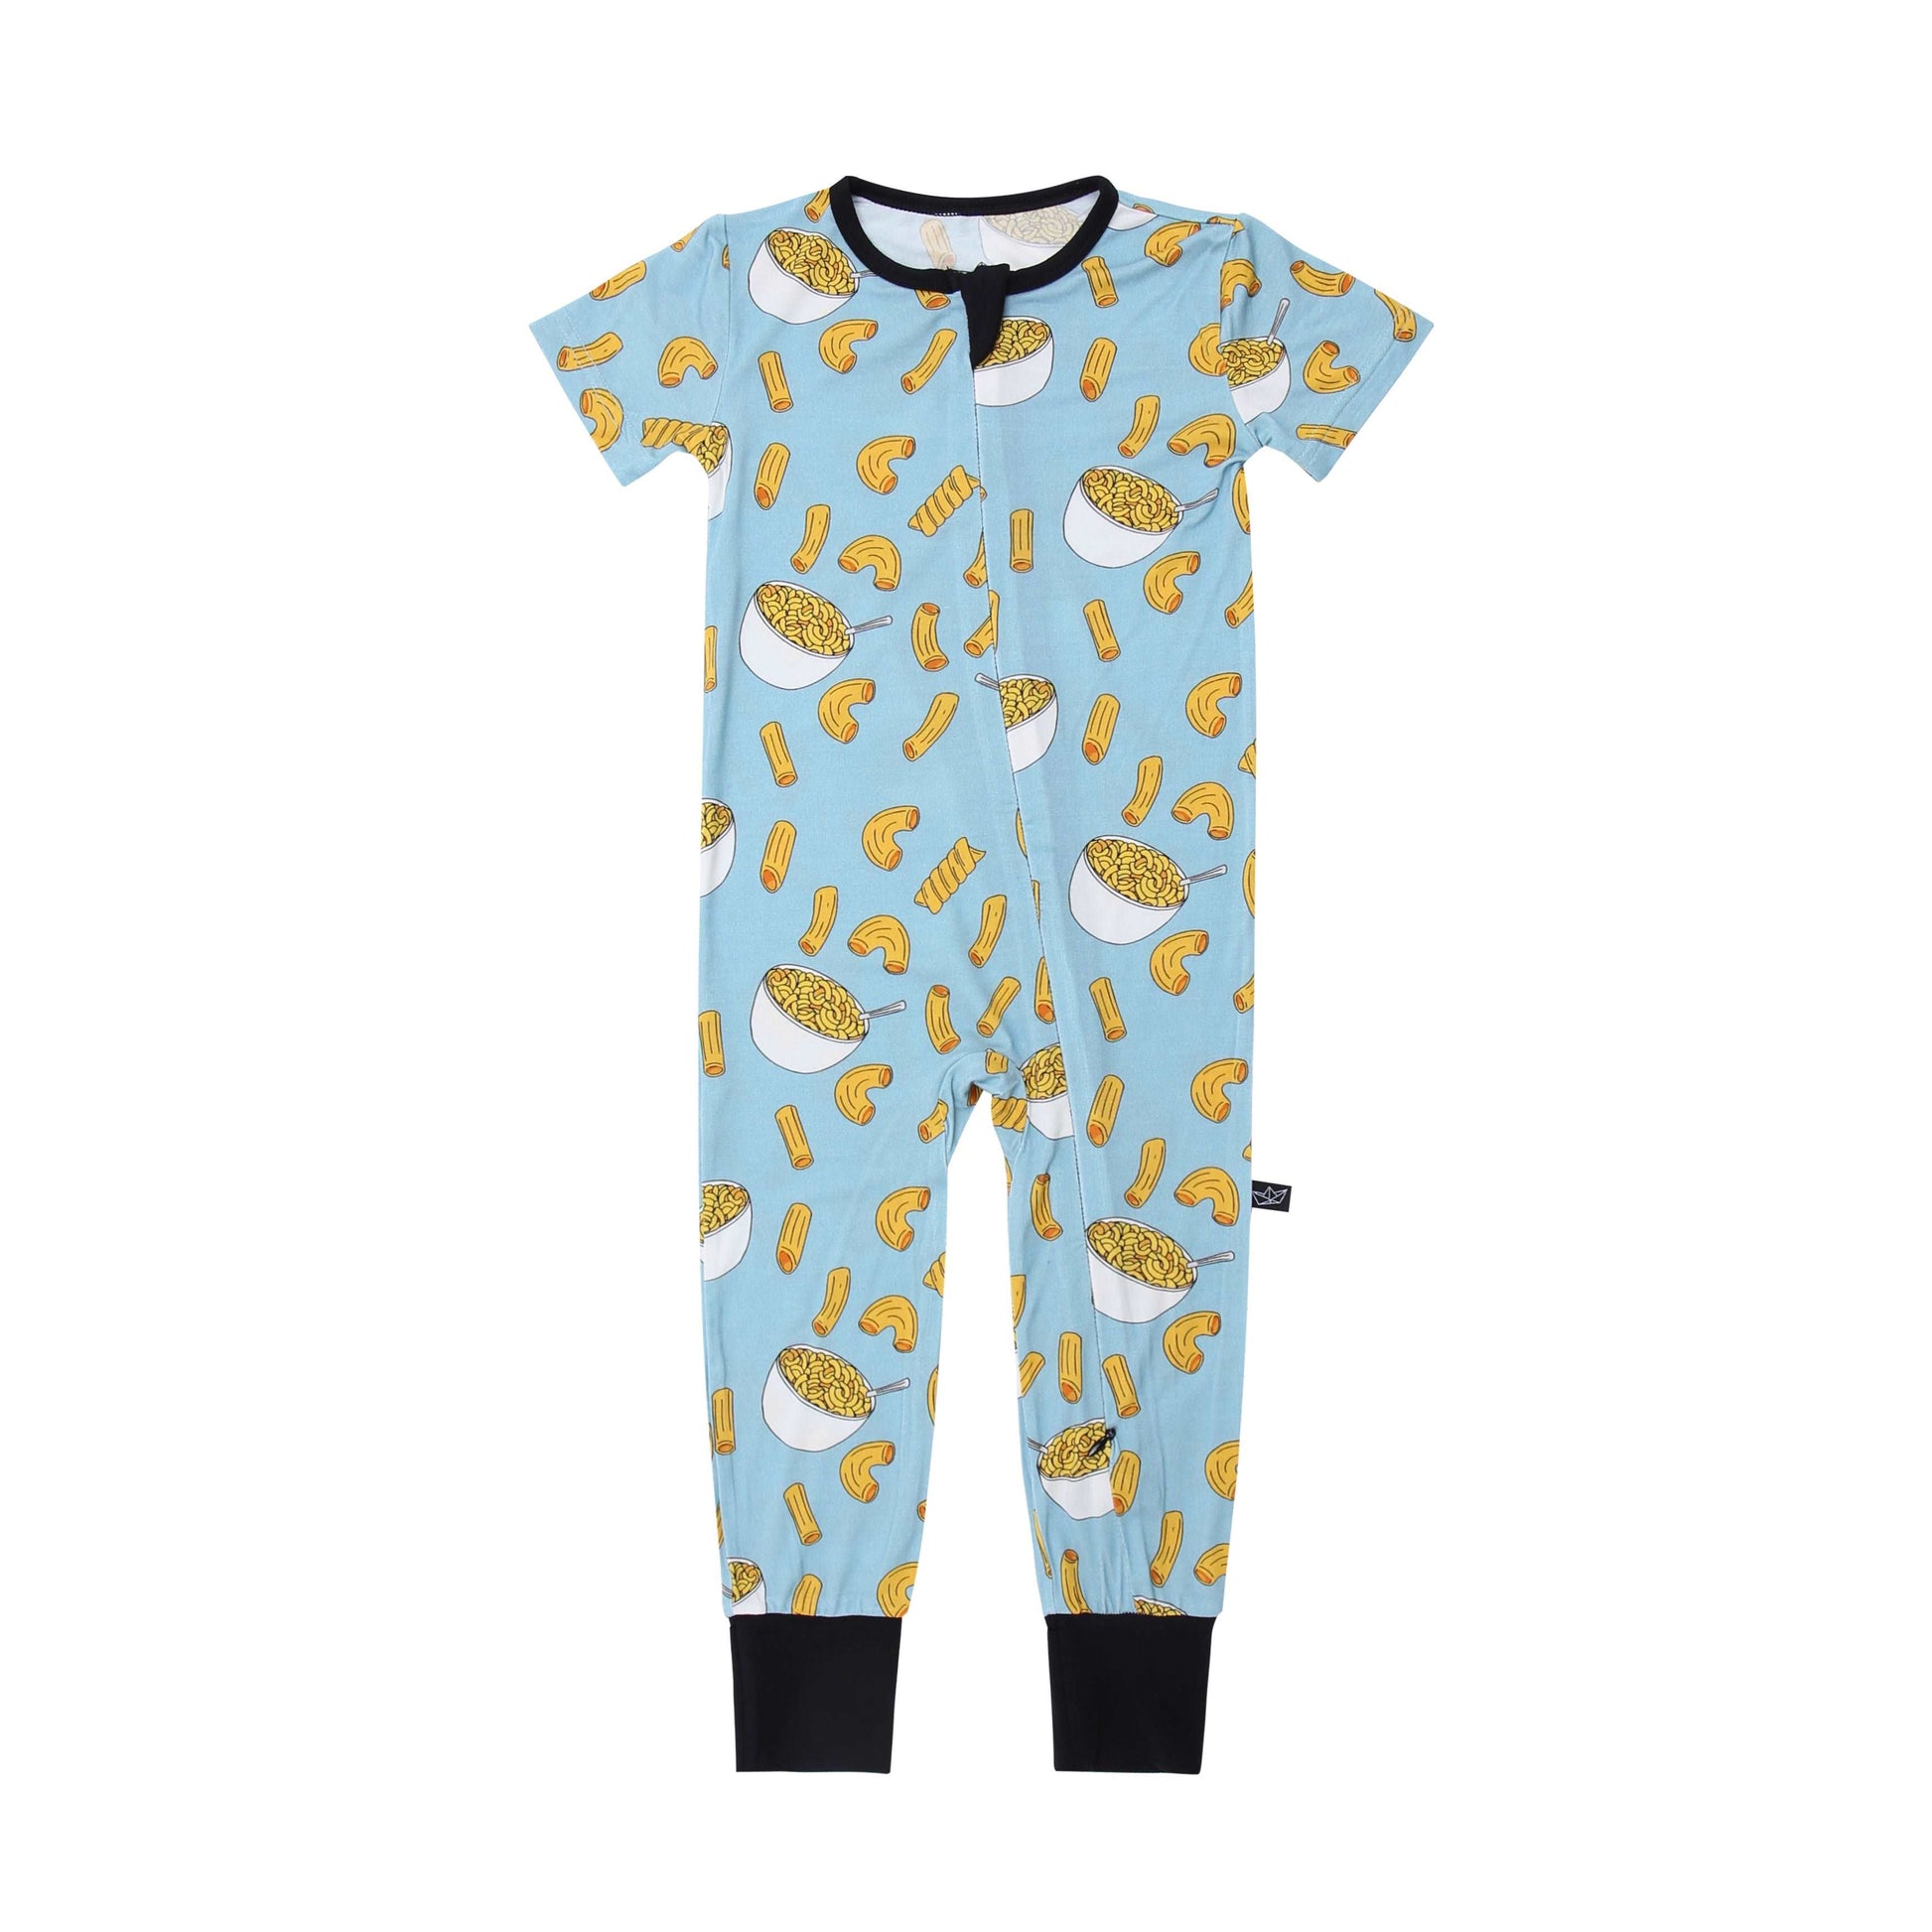 Mac and Cheese Convertible Bamboo Romper